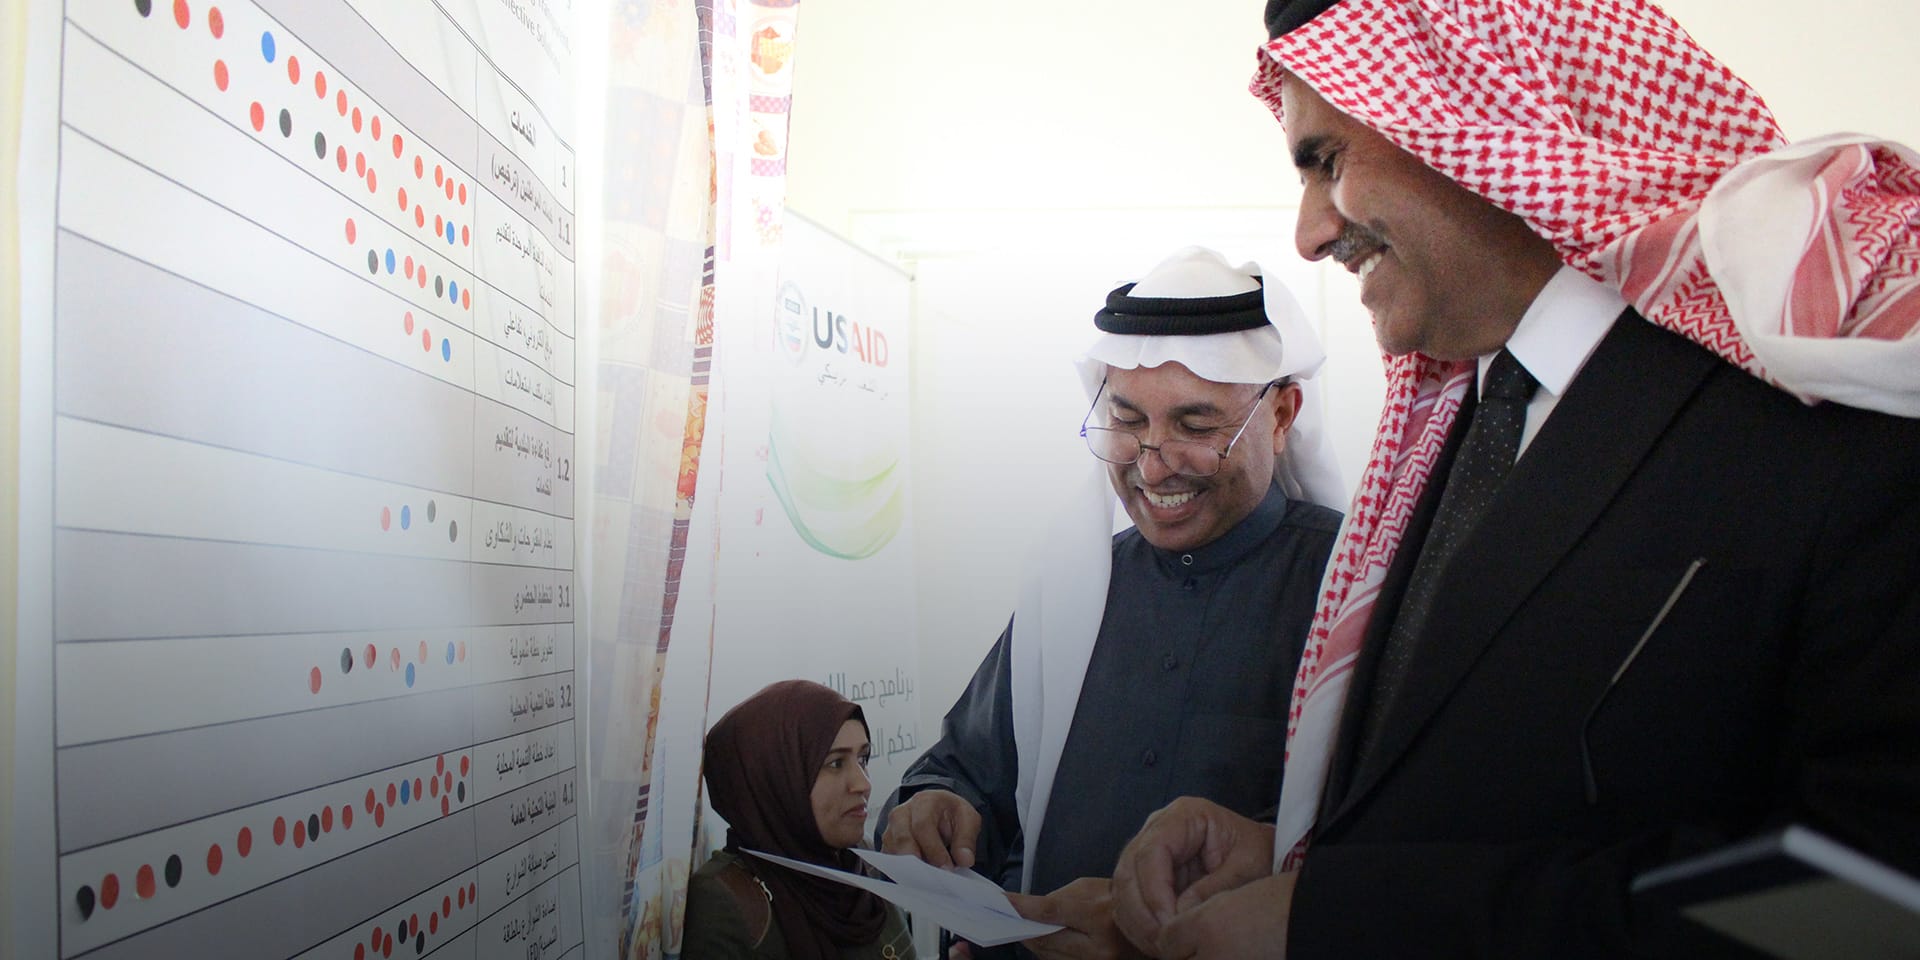 Two people smiling as they discuss a chart on the wall in front of them.